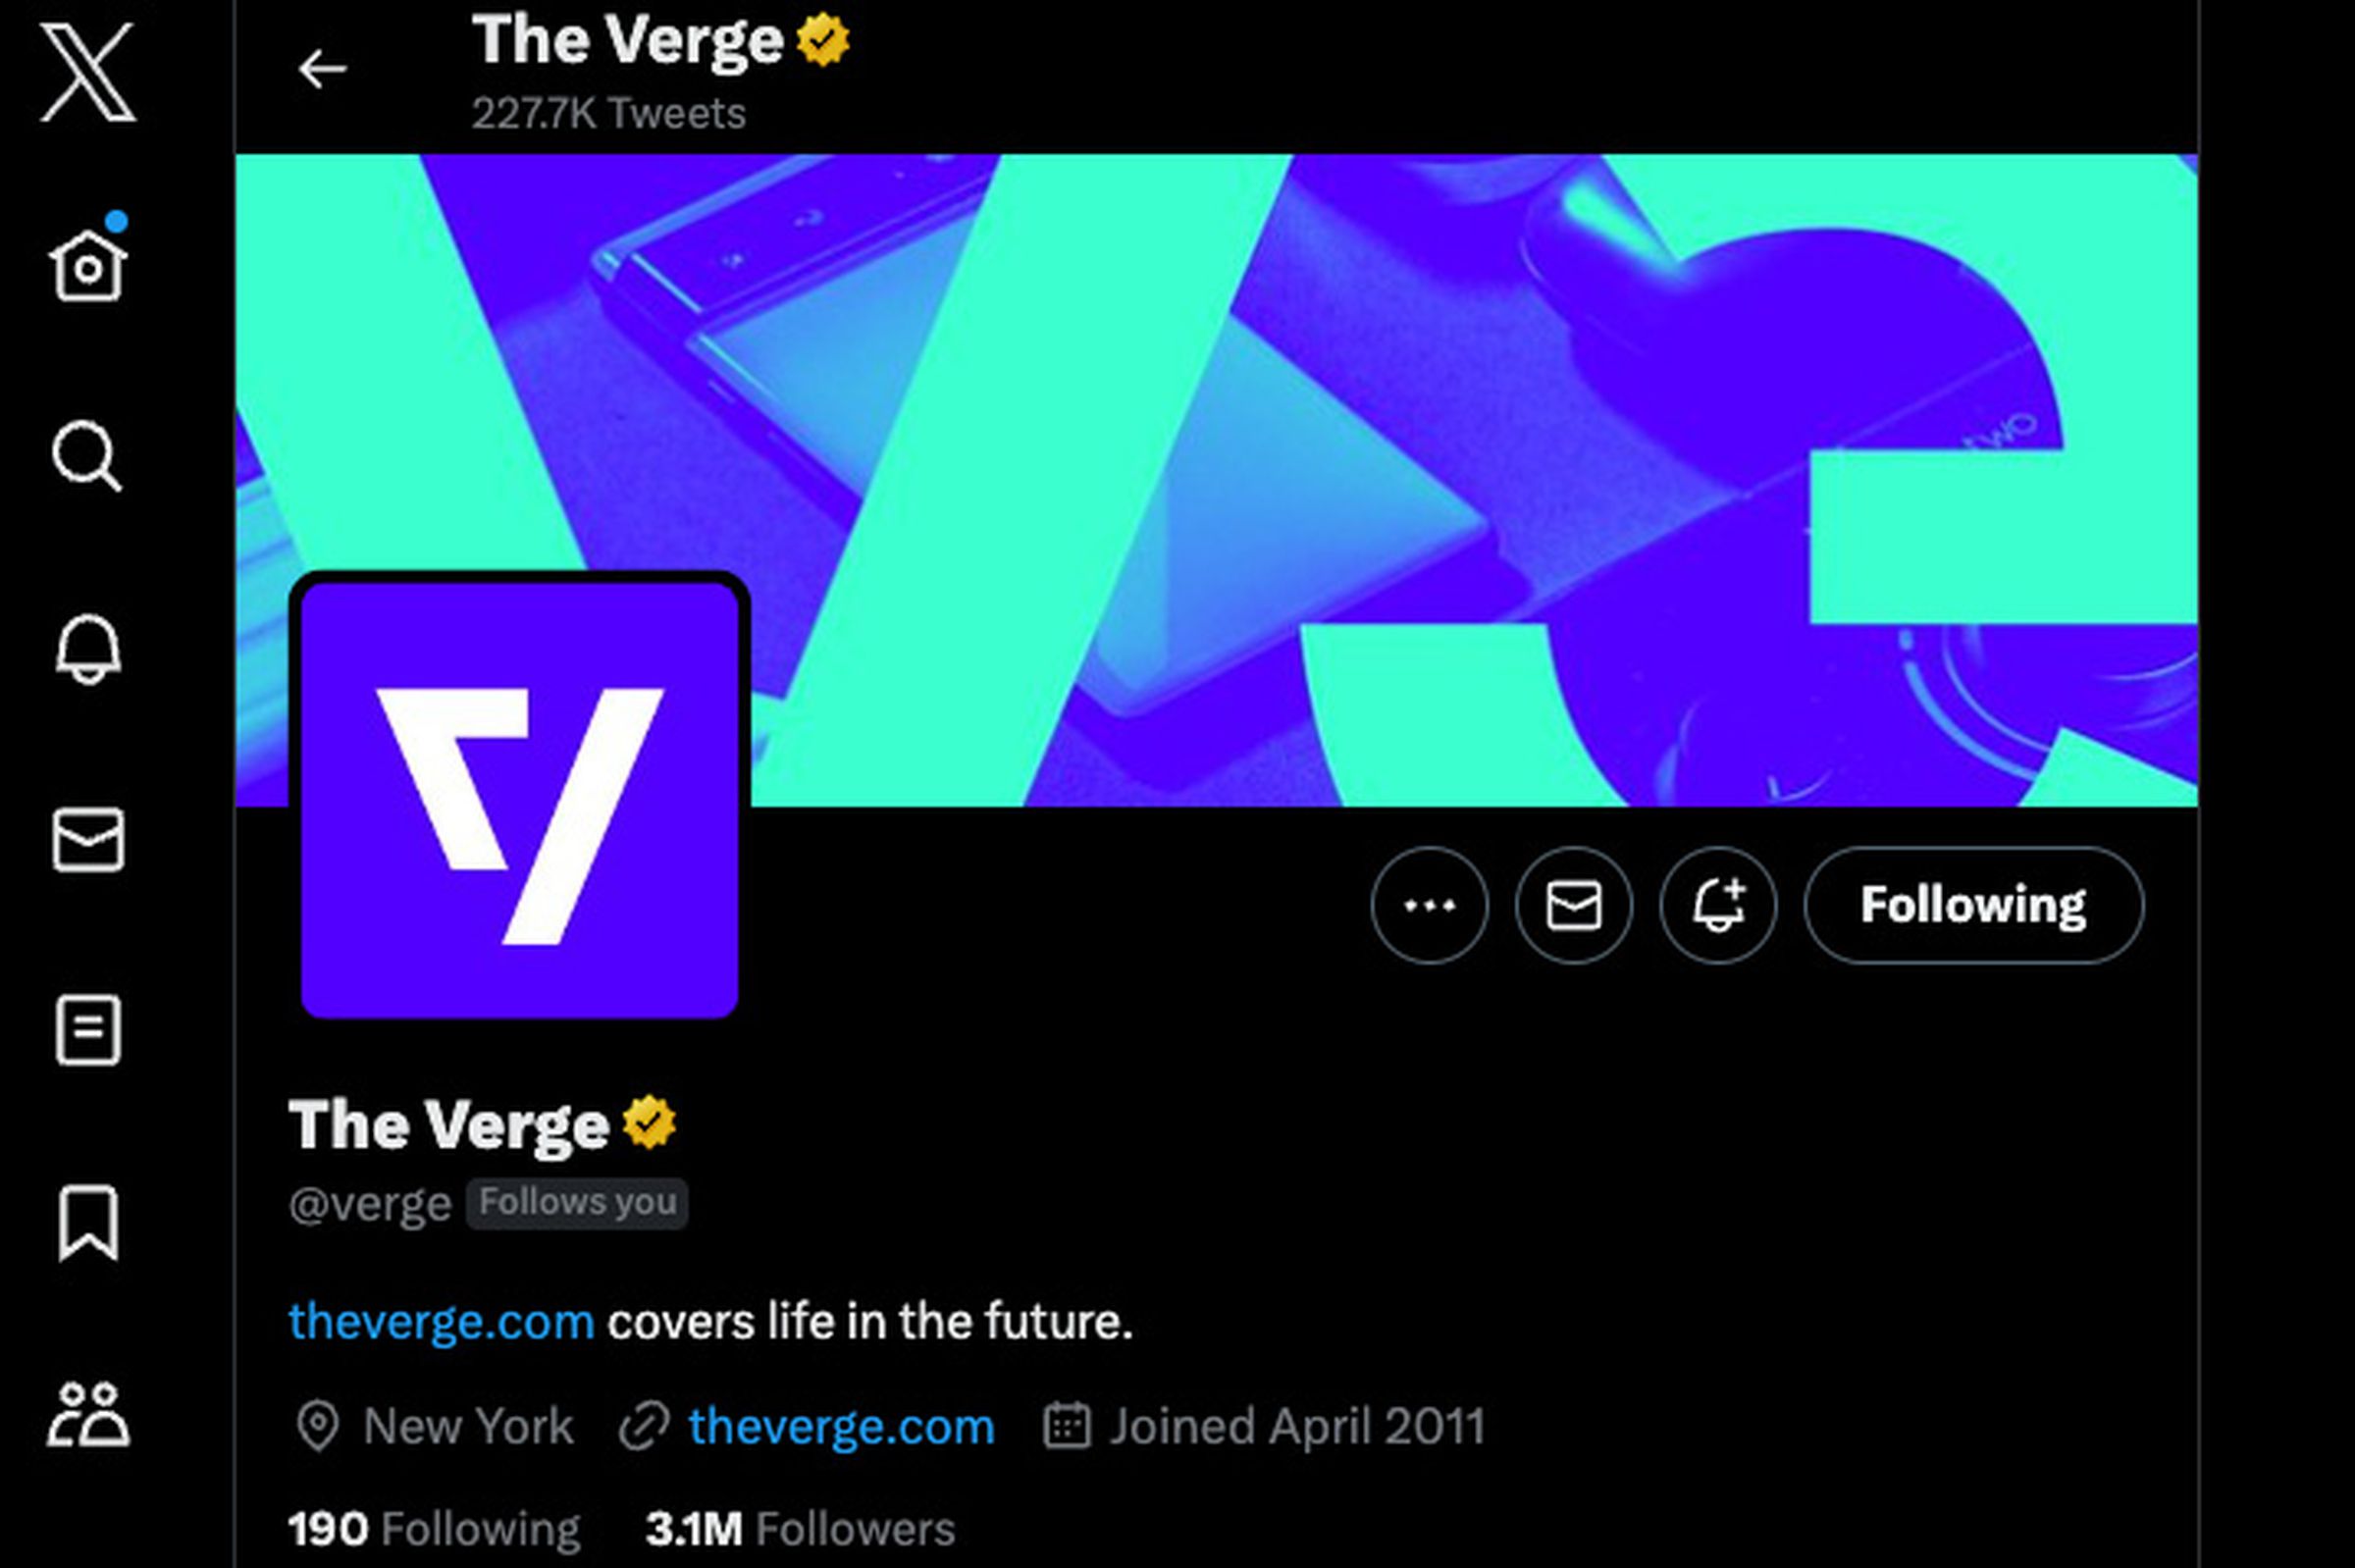 Screenshot of Verge’s Twitter / X profile showing the new logo.